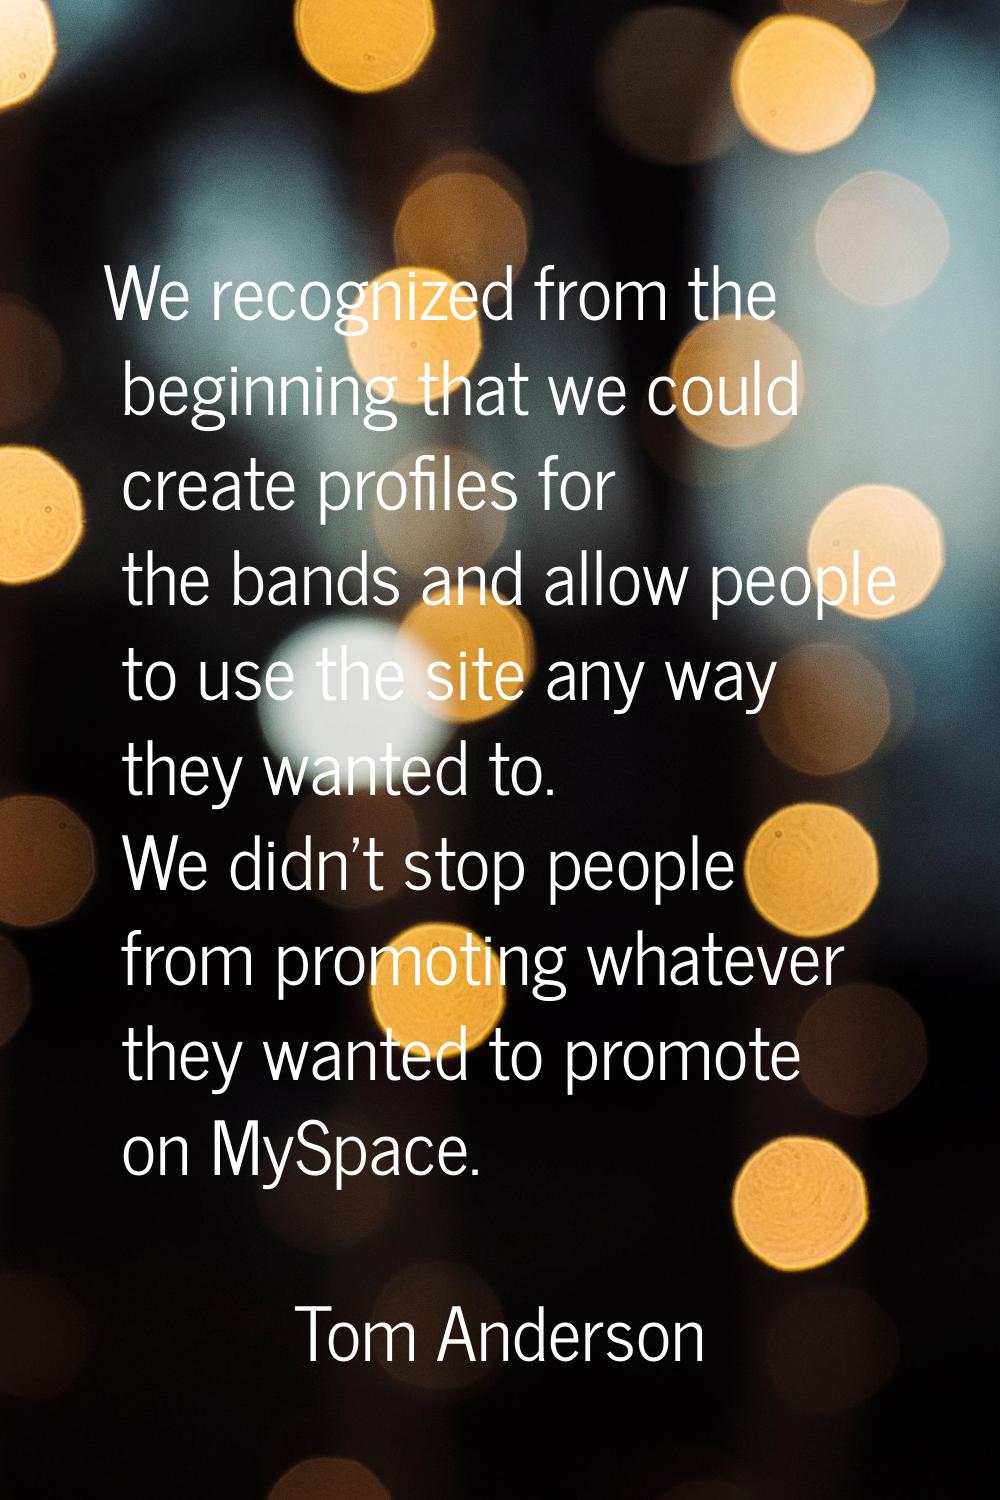 We recognized from the beginning that we could create profiles for the bands and allow people to us